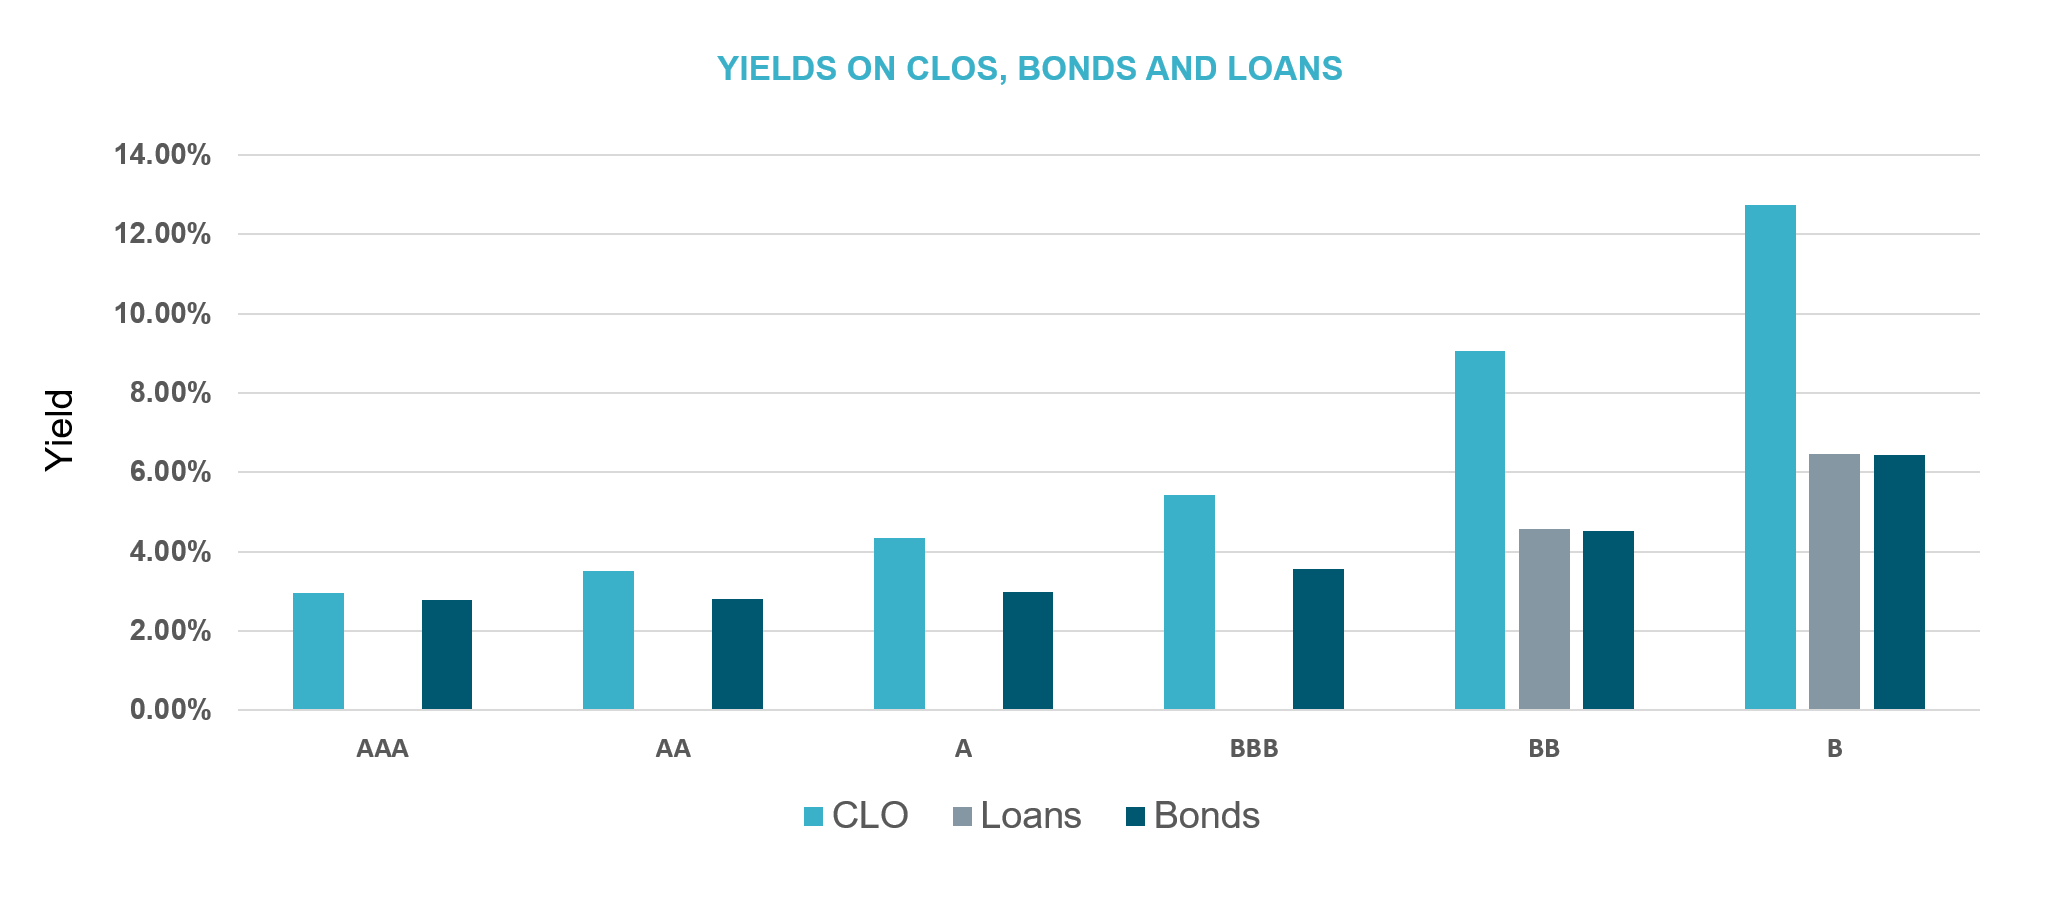 Bonds and Loans